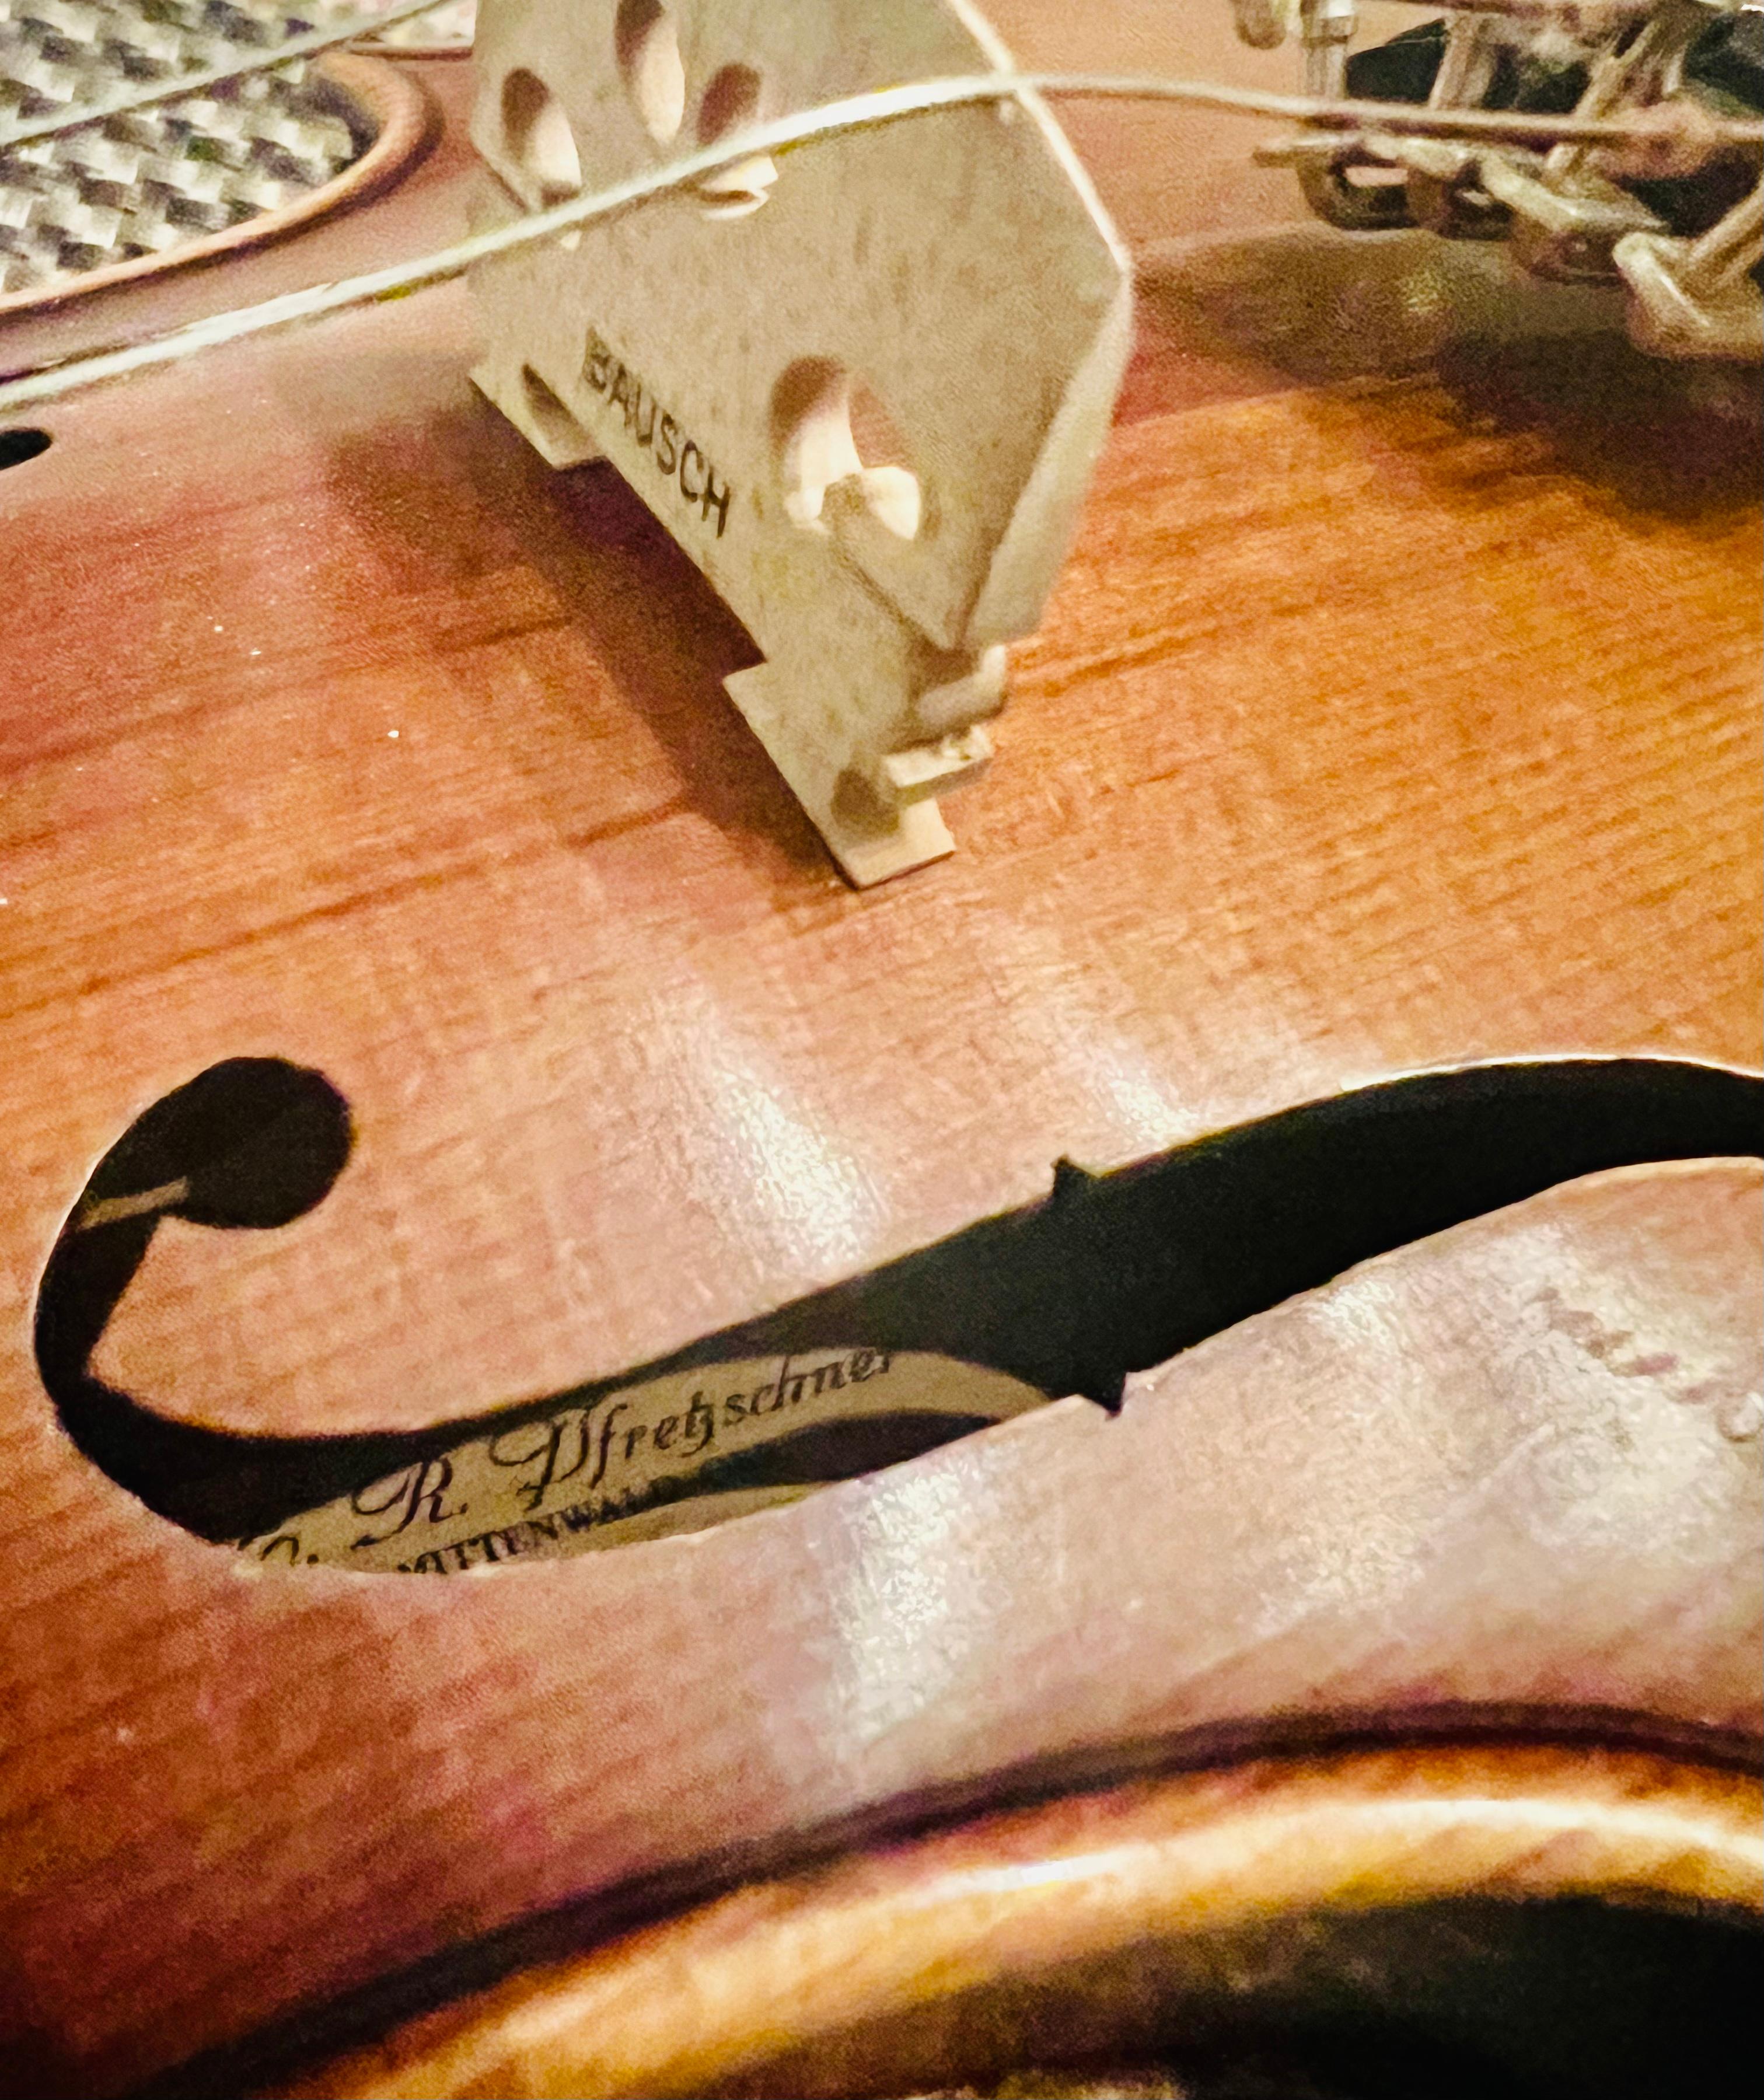 1970 3/4 E.R. Pfretzschner Hand-Crafted Violin in the Style of A. Stradivarius im Angebot 10